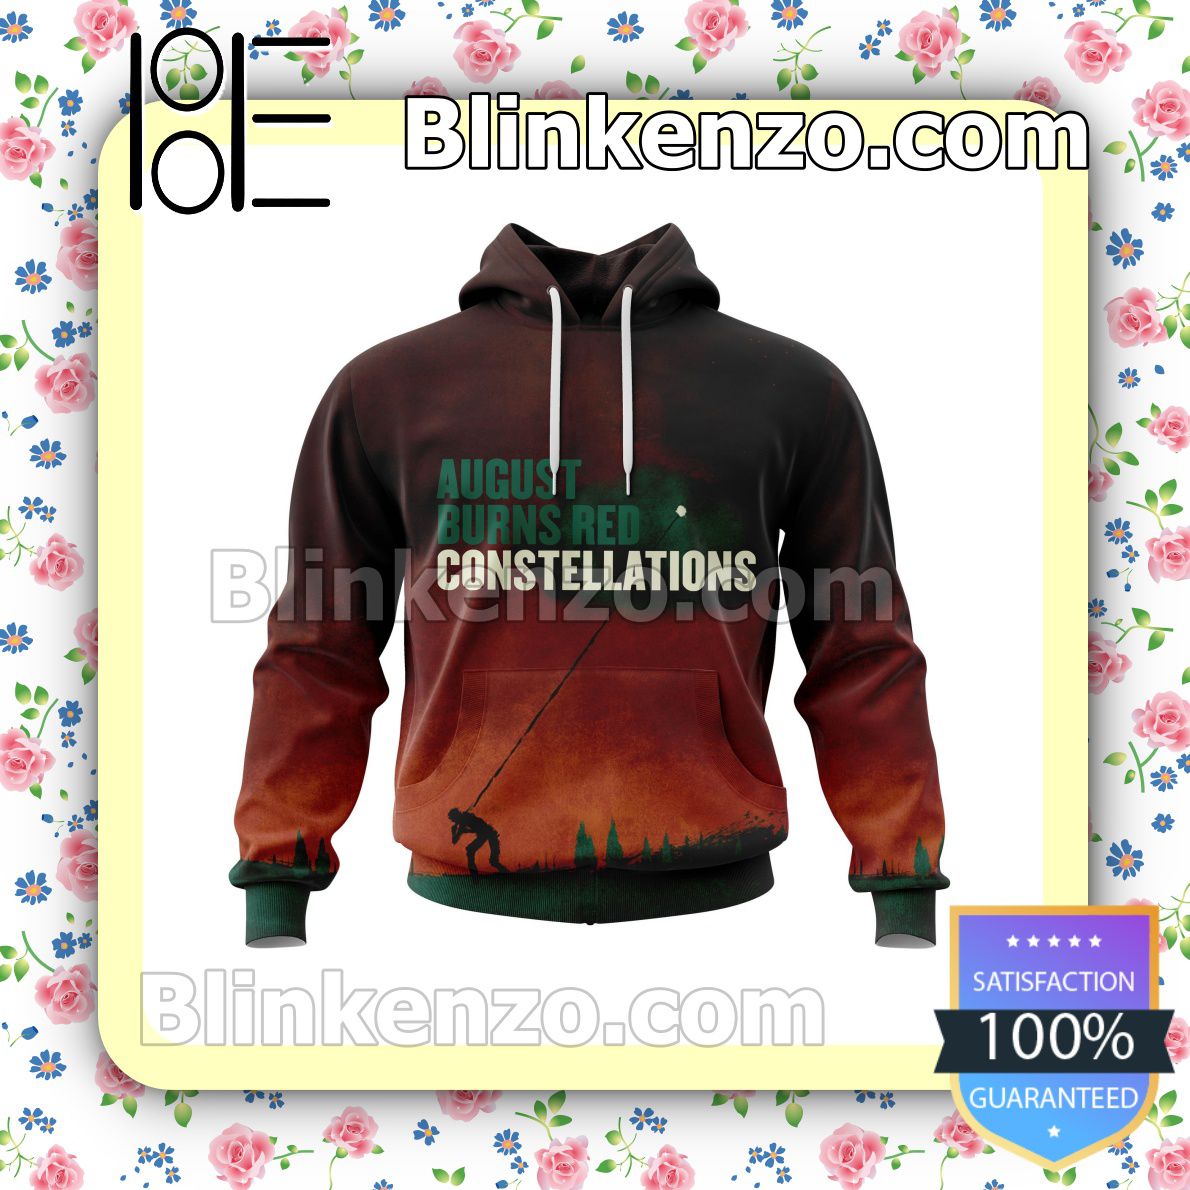 Personalized August Burns Red Constellations Album Cover Hooded Sweatshirt